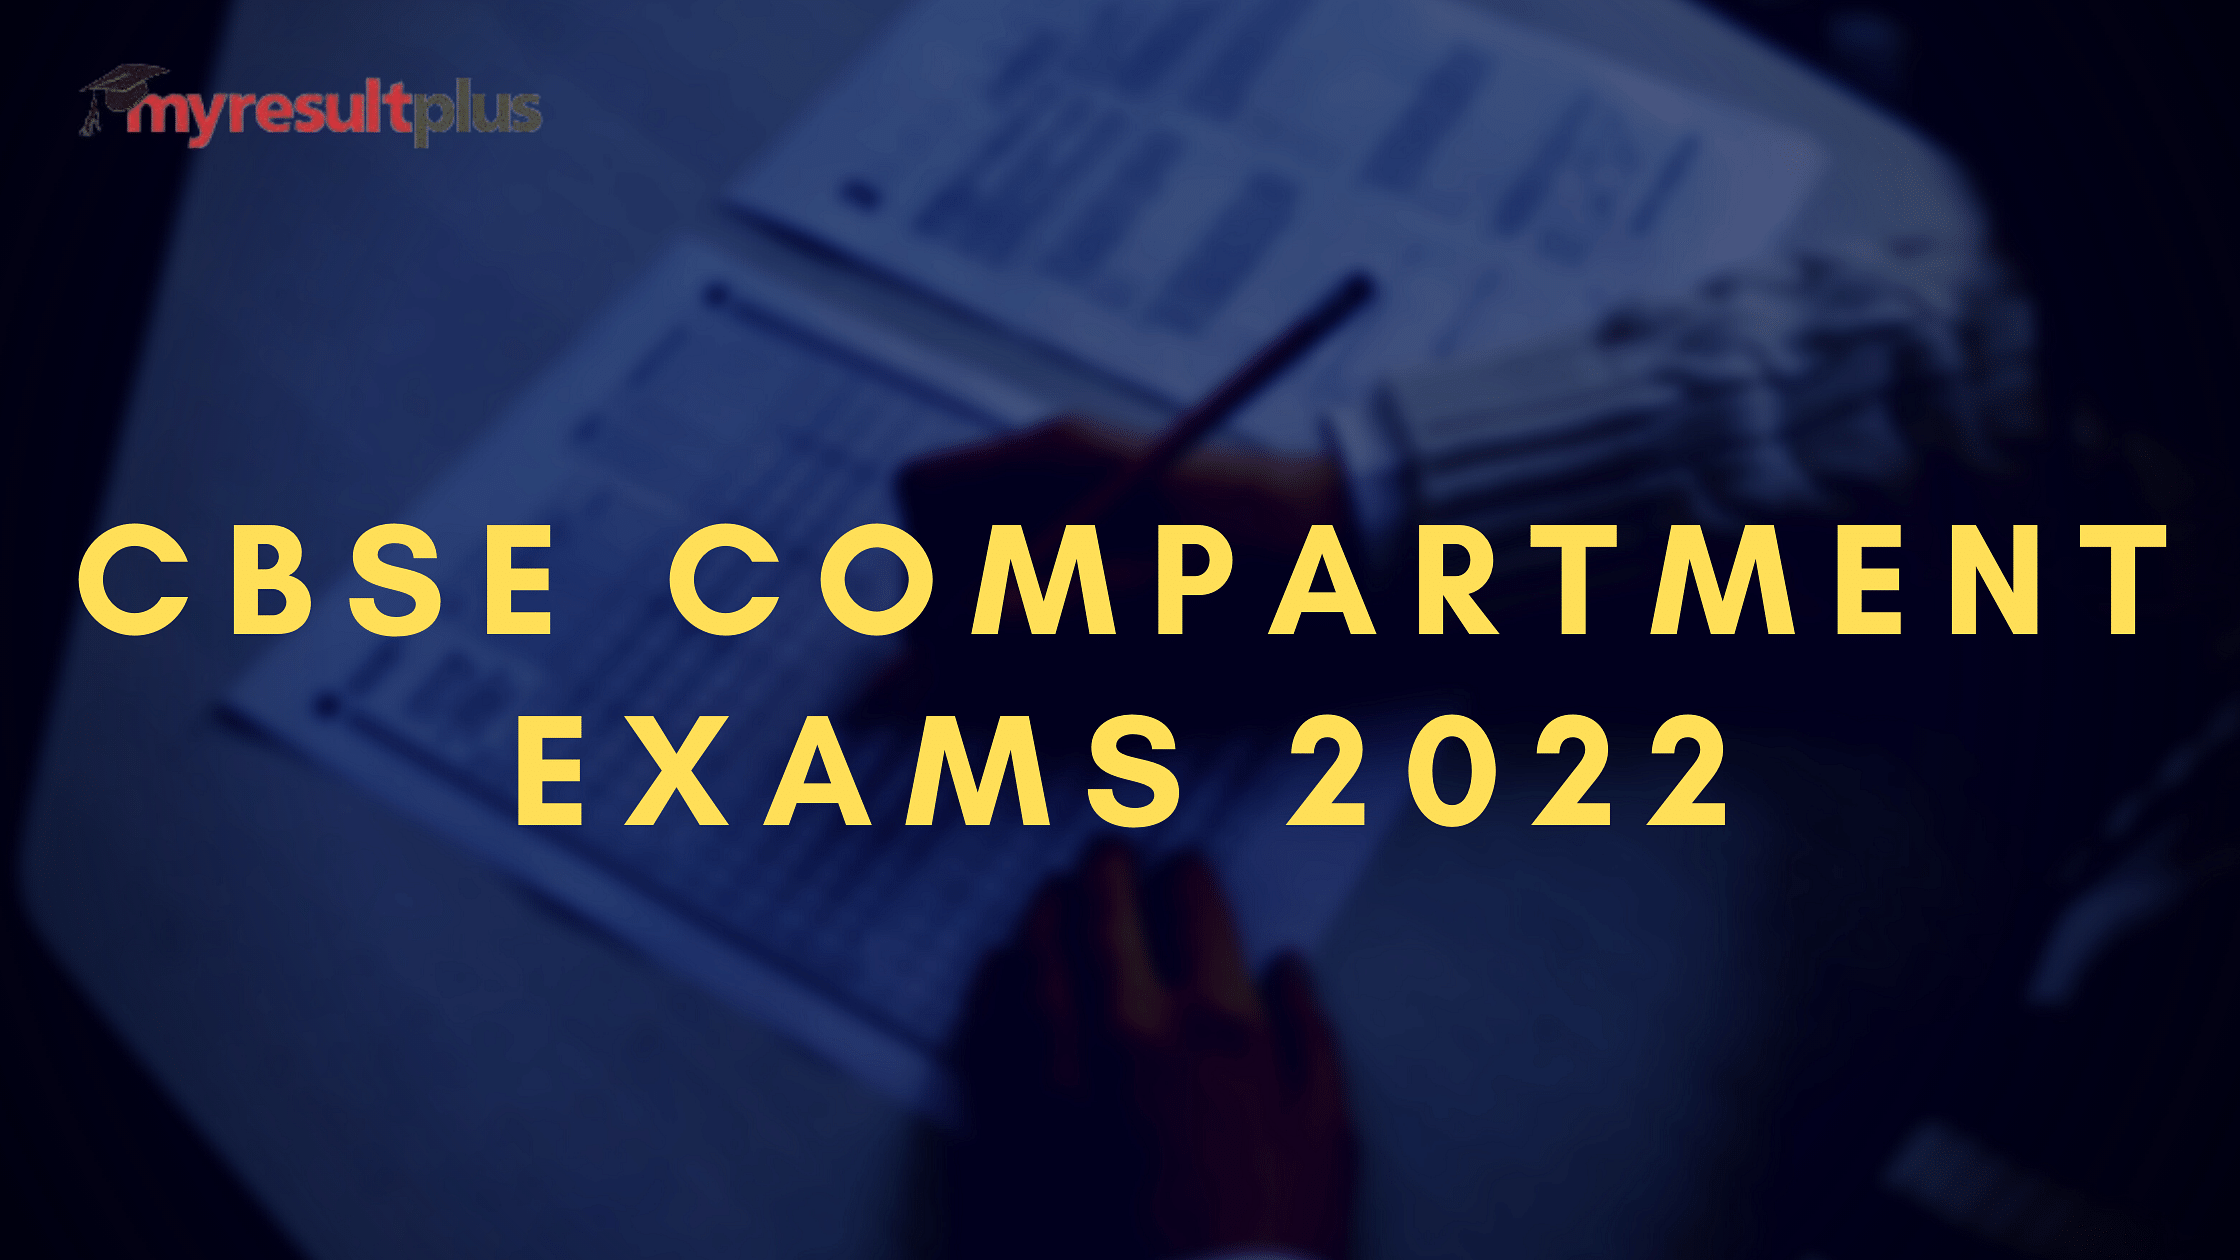 CBSE Compartment Exam 2022: Last Day To Submit Application Form For Private Students, Details Here